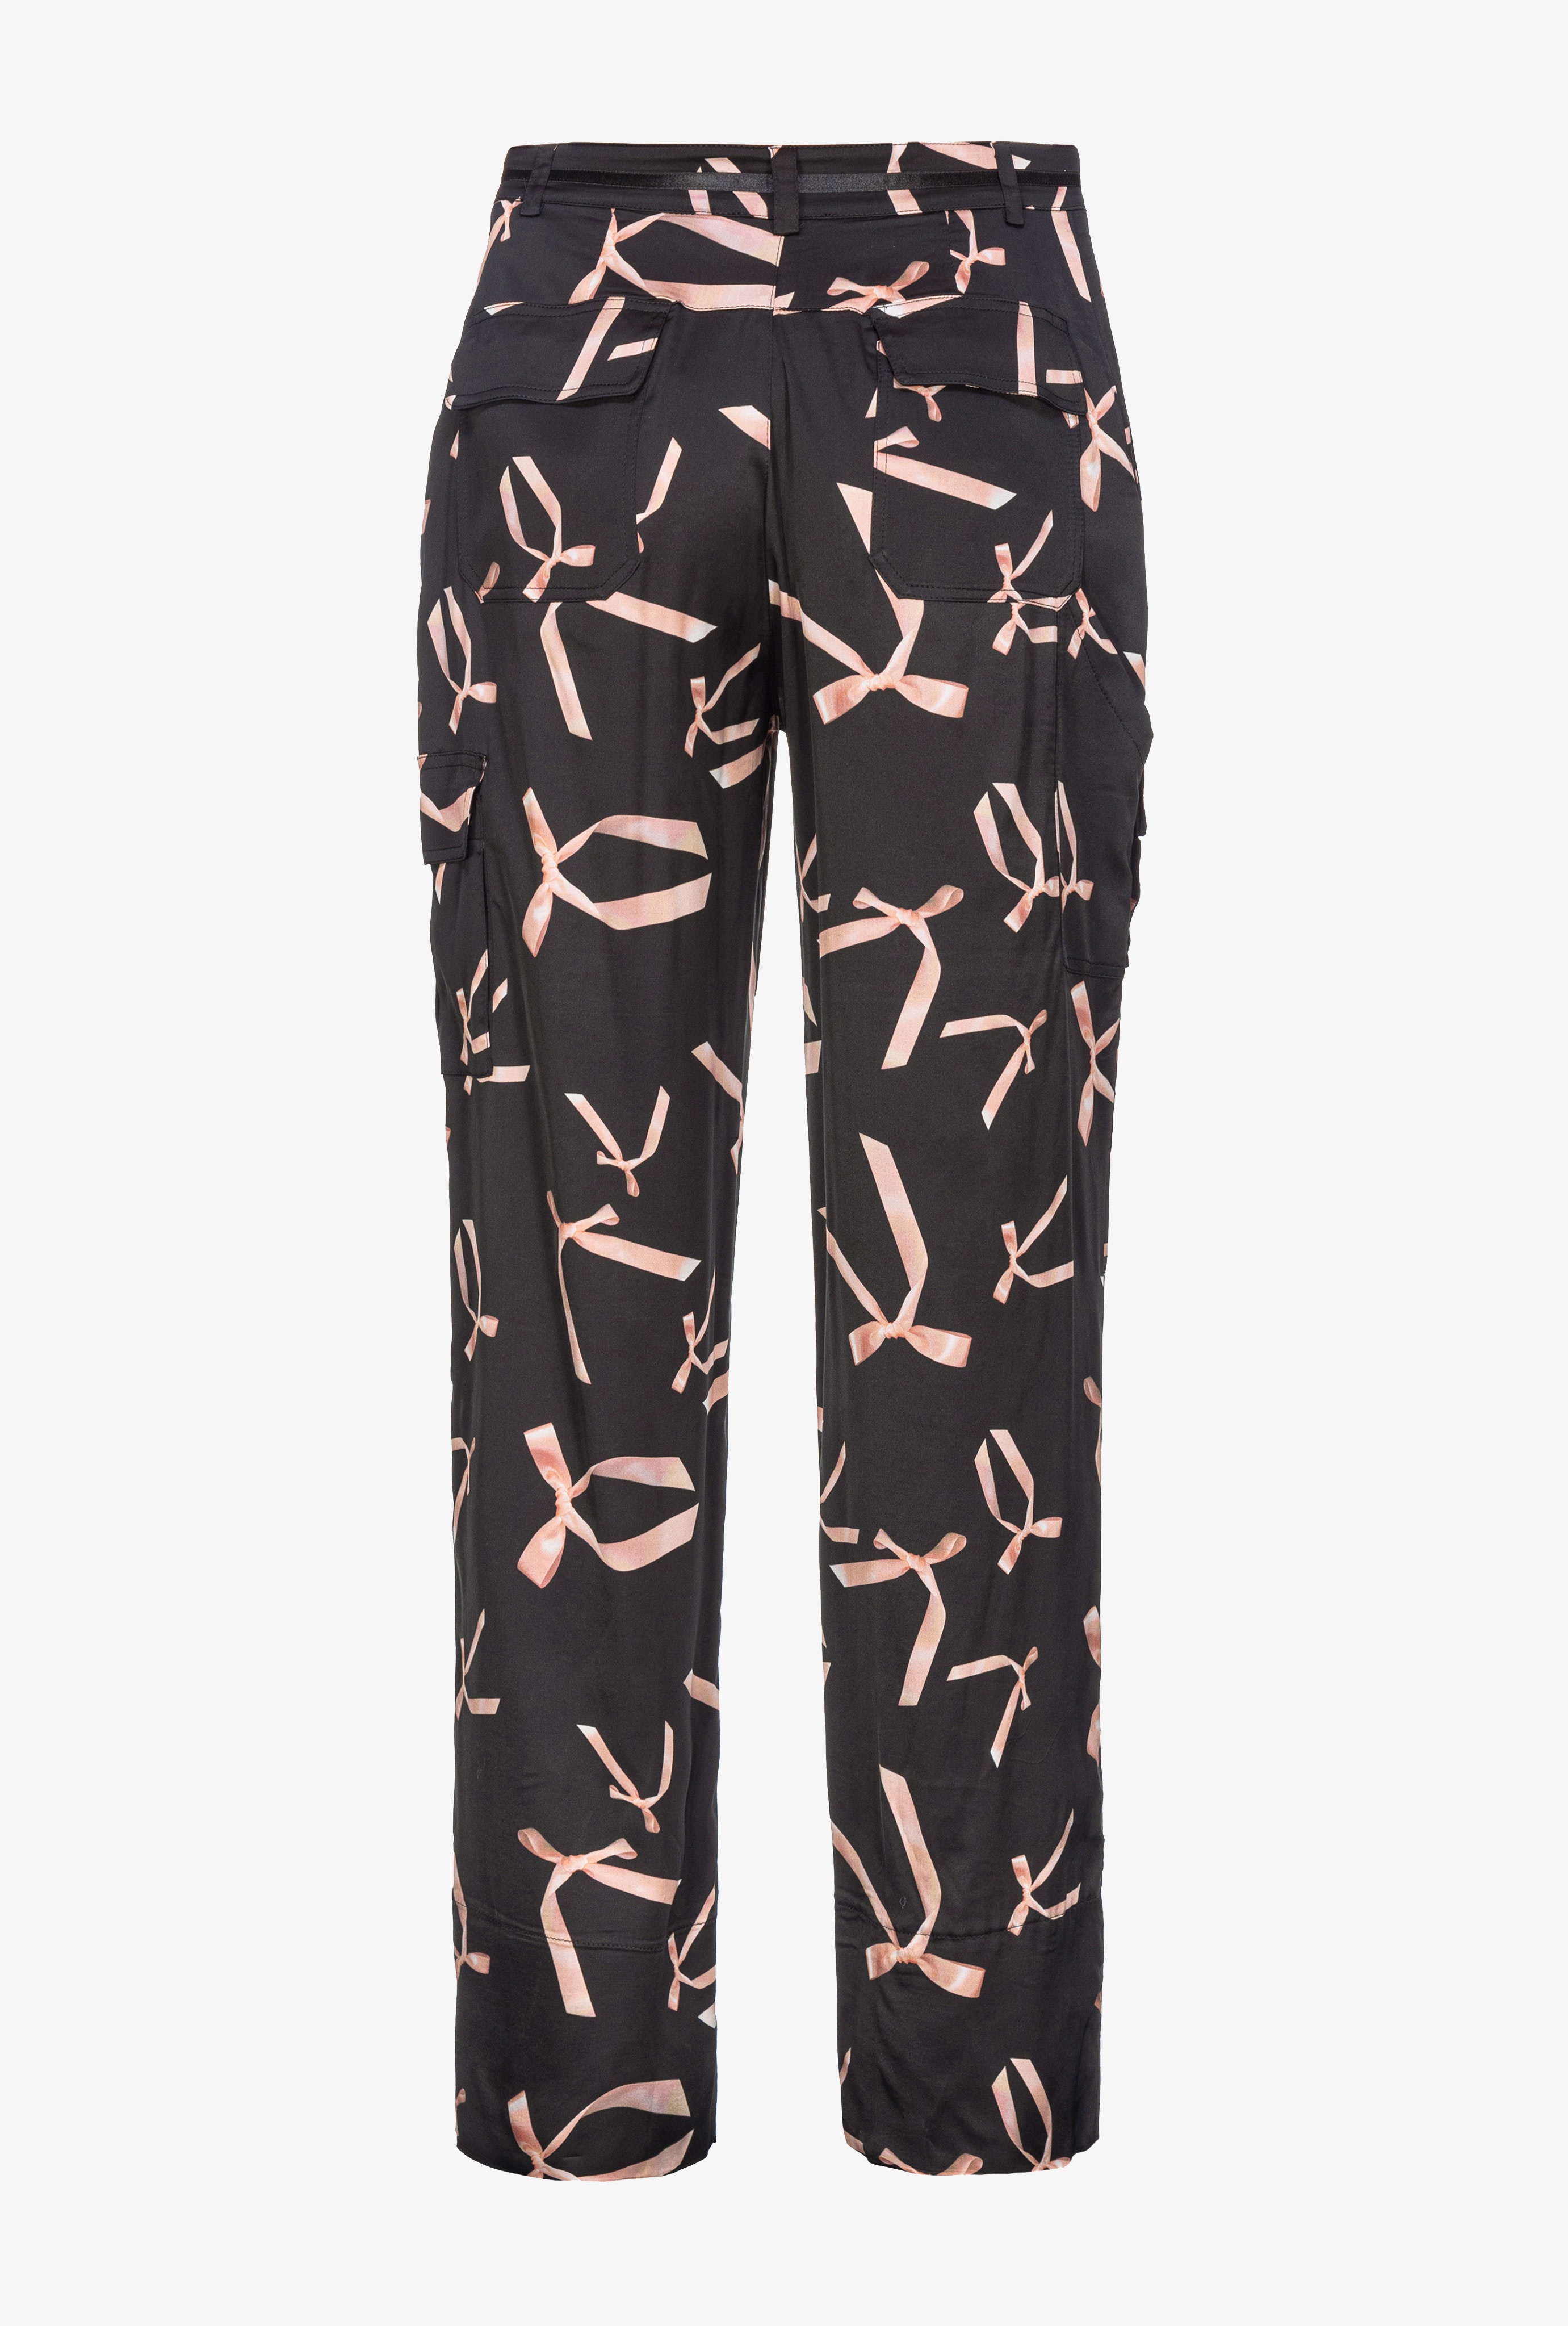 PINKO REIMAGINE BOW-PRINT CARGO TROUSERS BY PATRICK MCDOWELL - 4